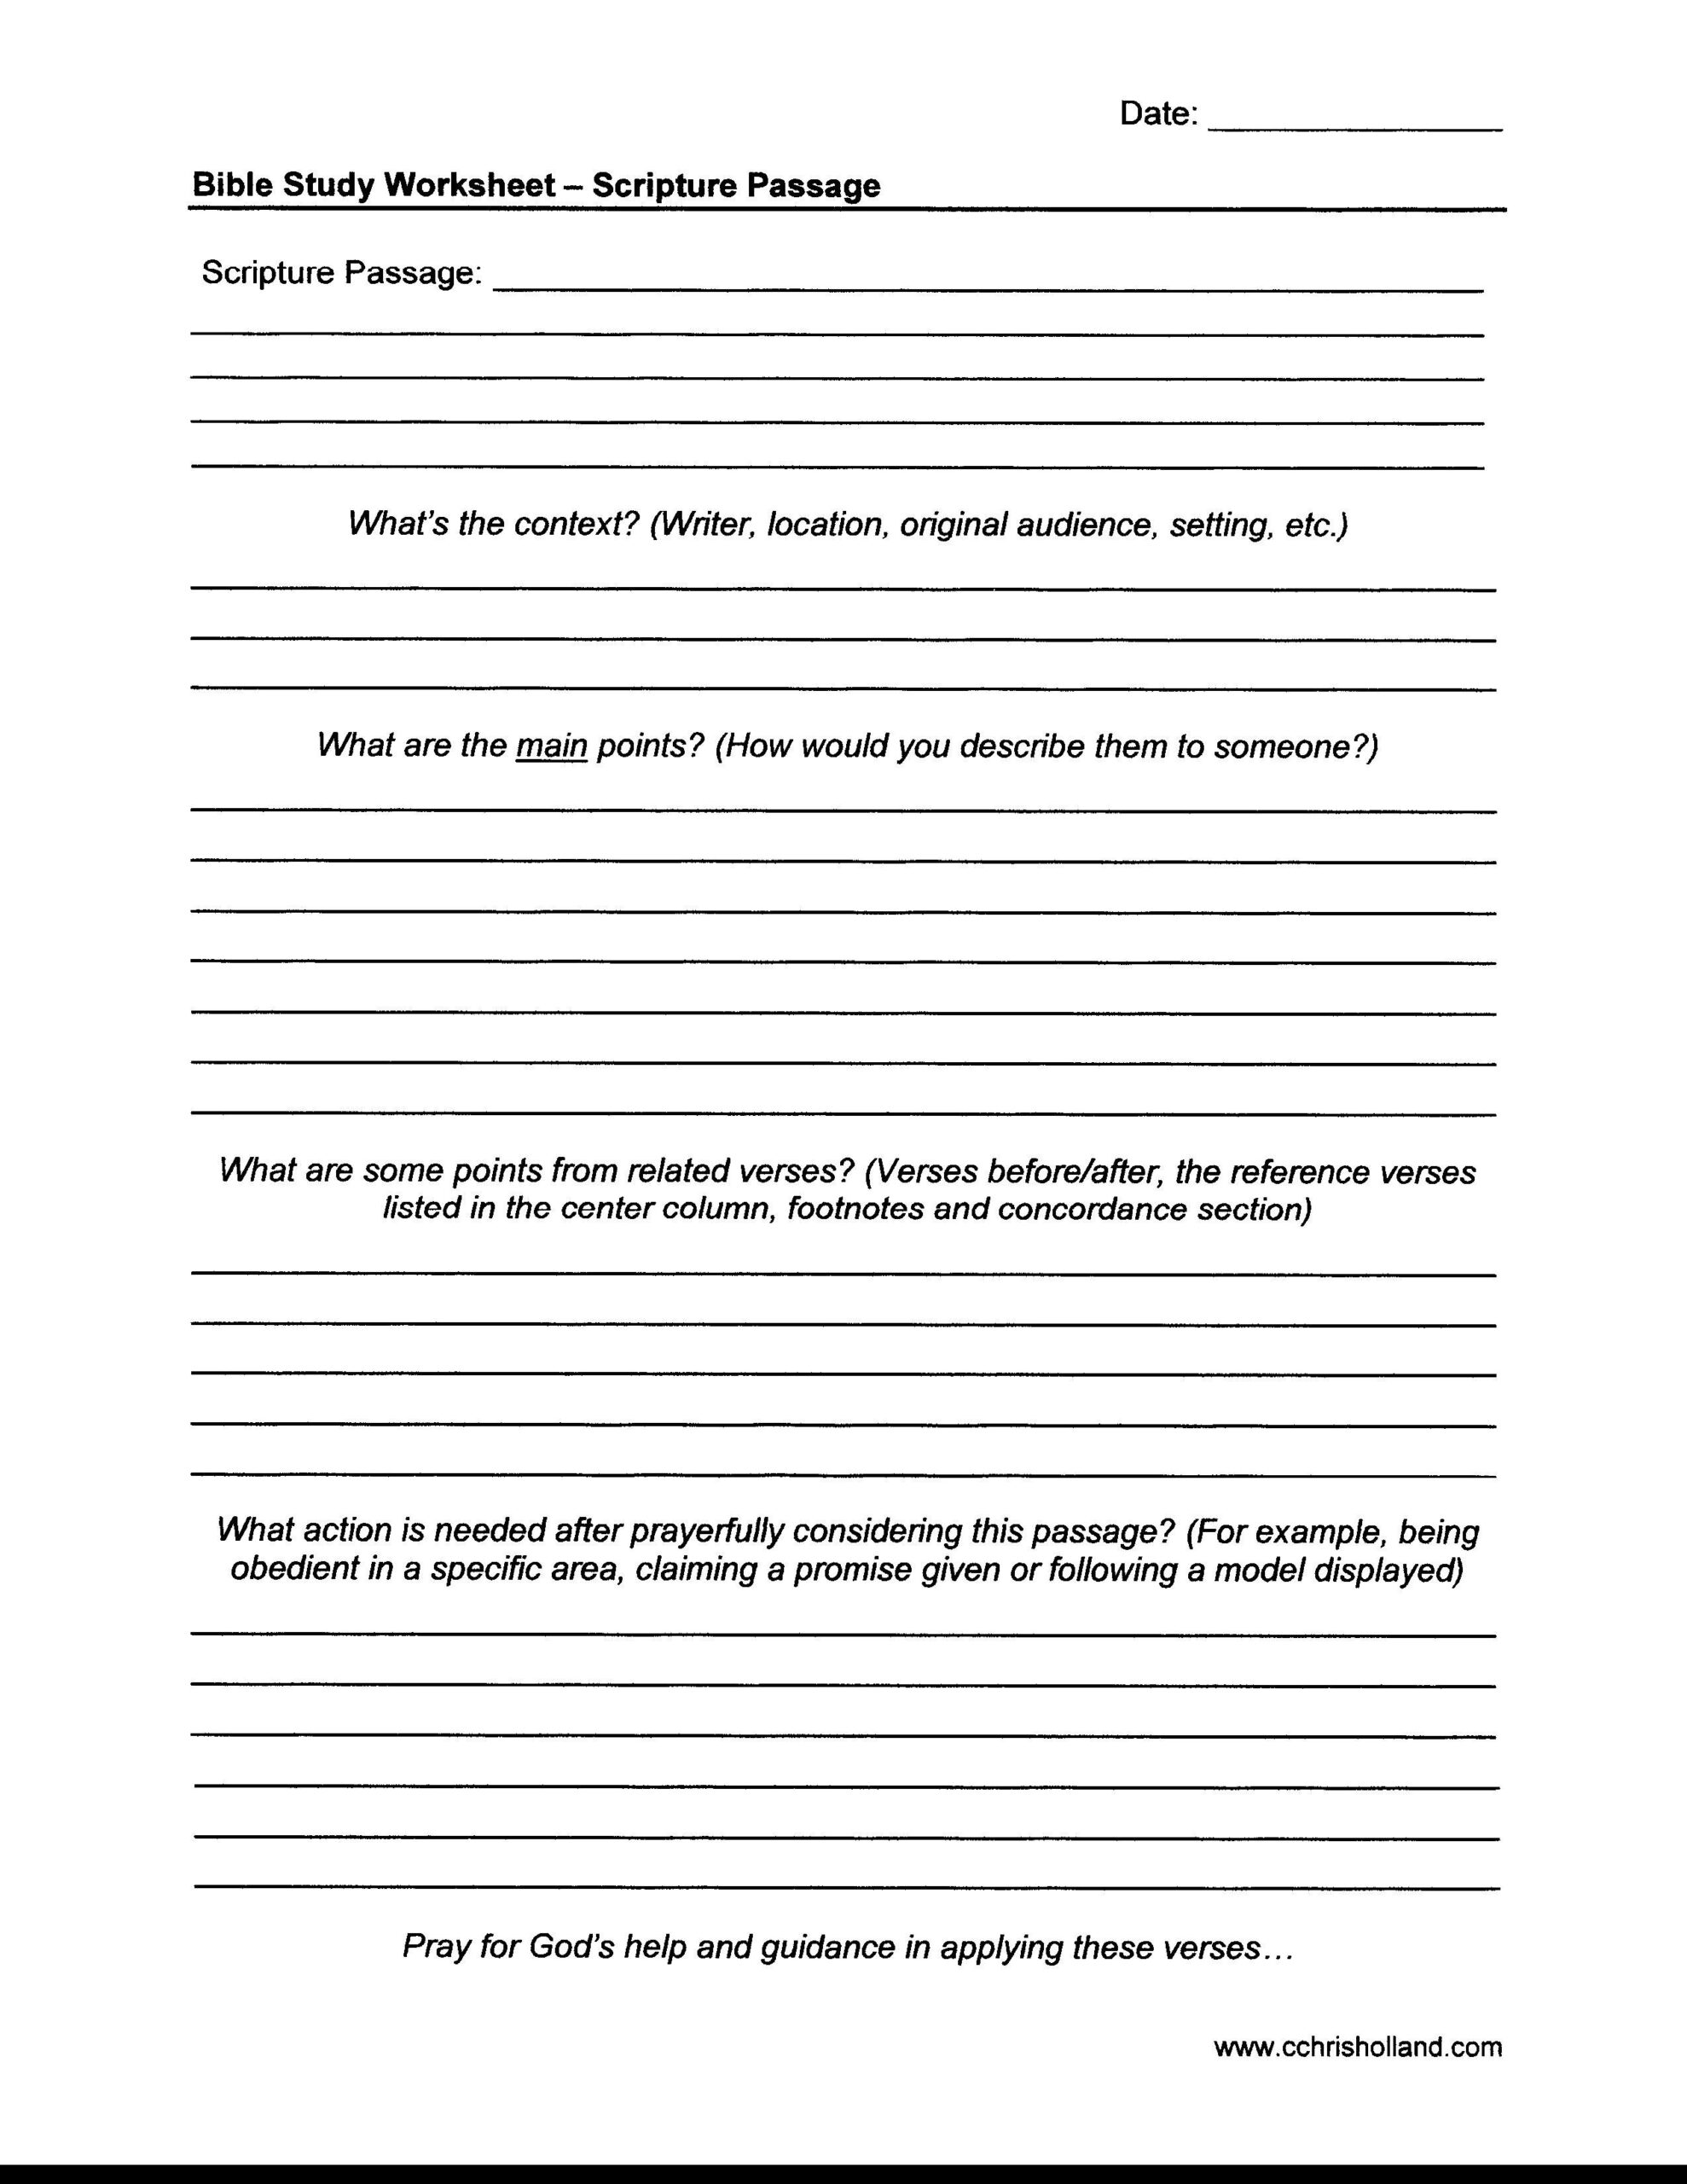 Free Printable Bible Study Worksheets 82 Images In Collection Page 1 